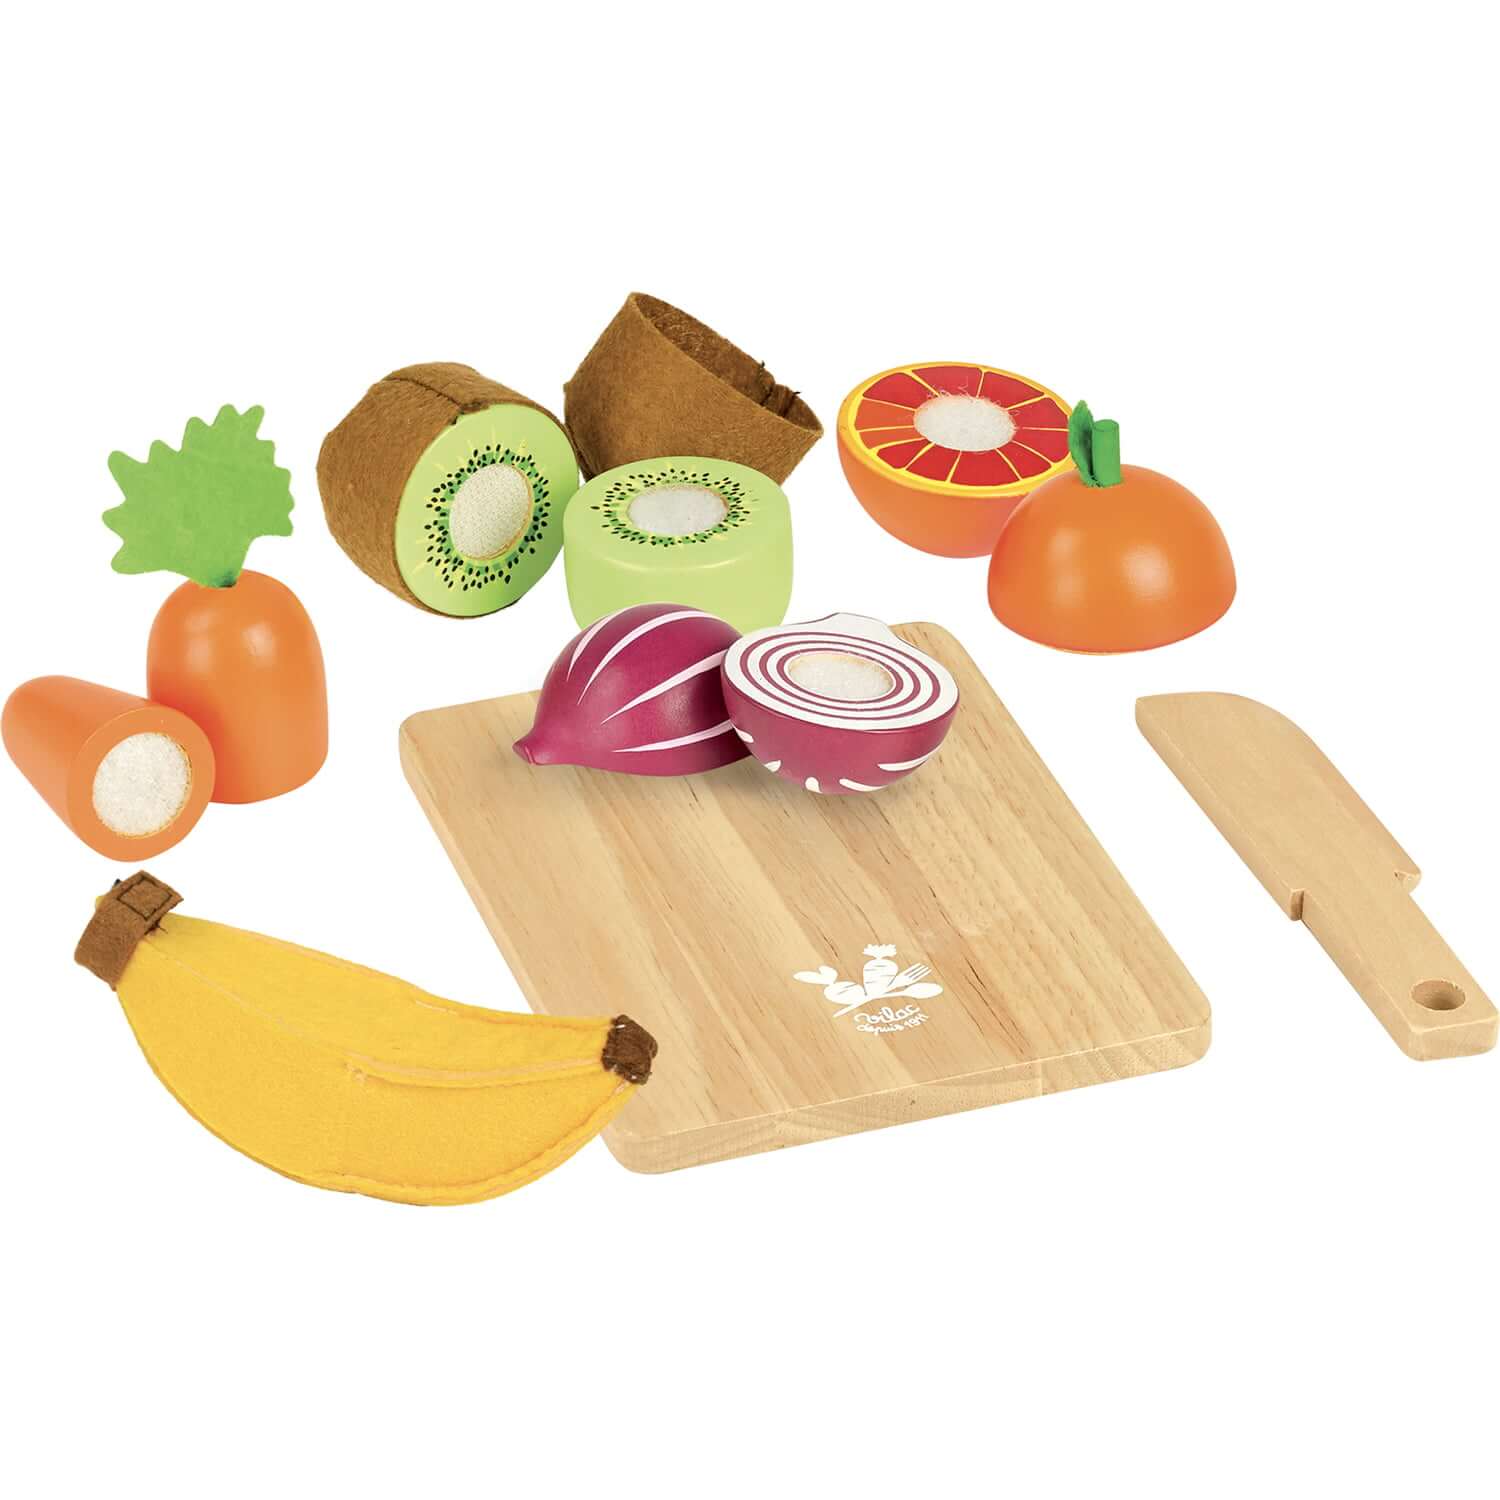 Vintage and stylish Vilac cutting fruits and vegetables set. This set comes 7 accessories including a chopping board, knife, onion, banana and much more!